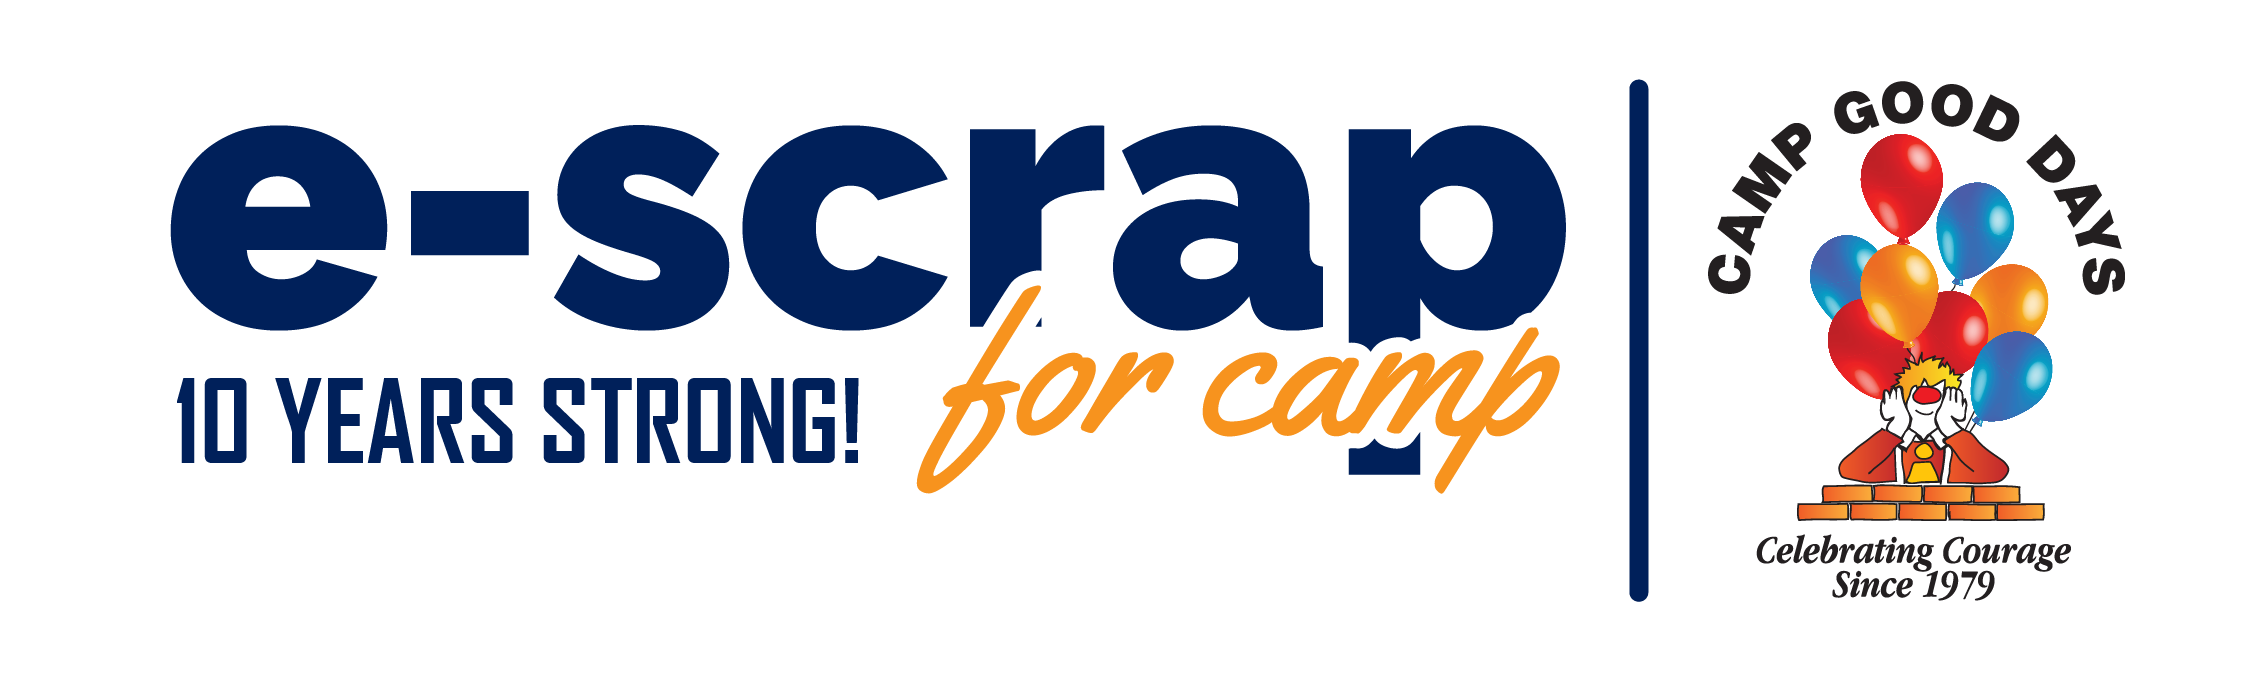 Donate E-Scrap For Western New York Camp Good Days